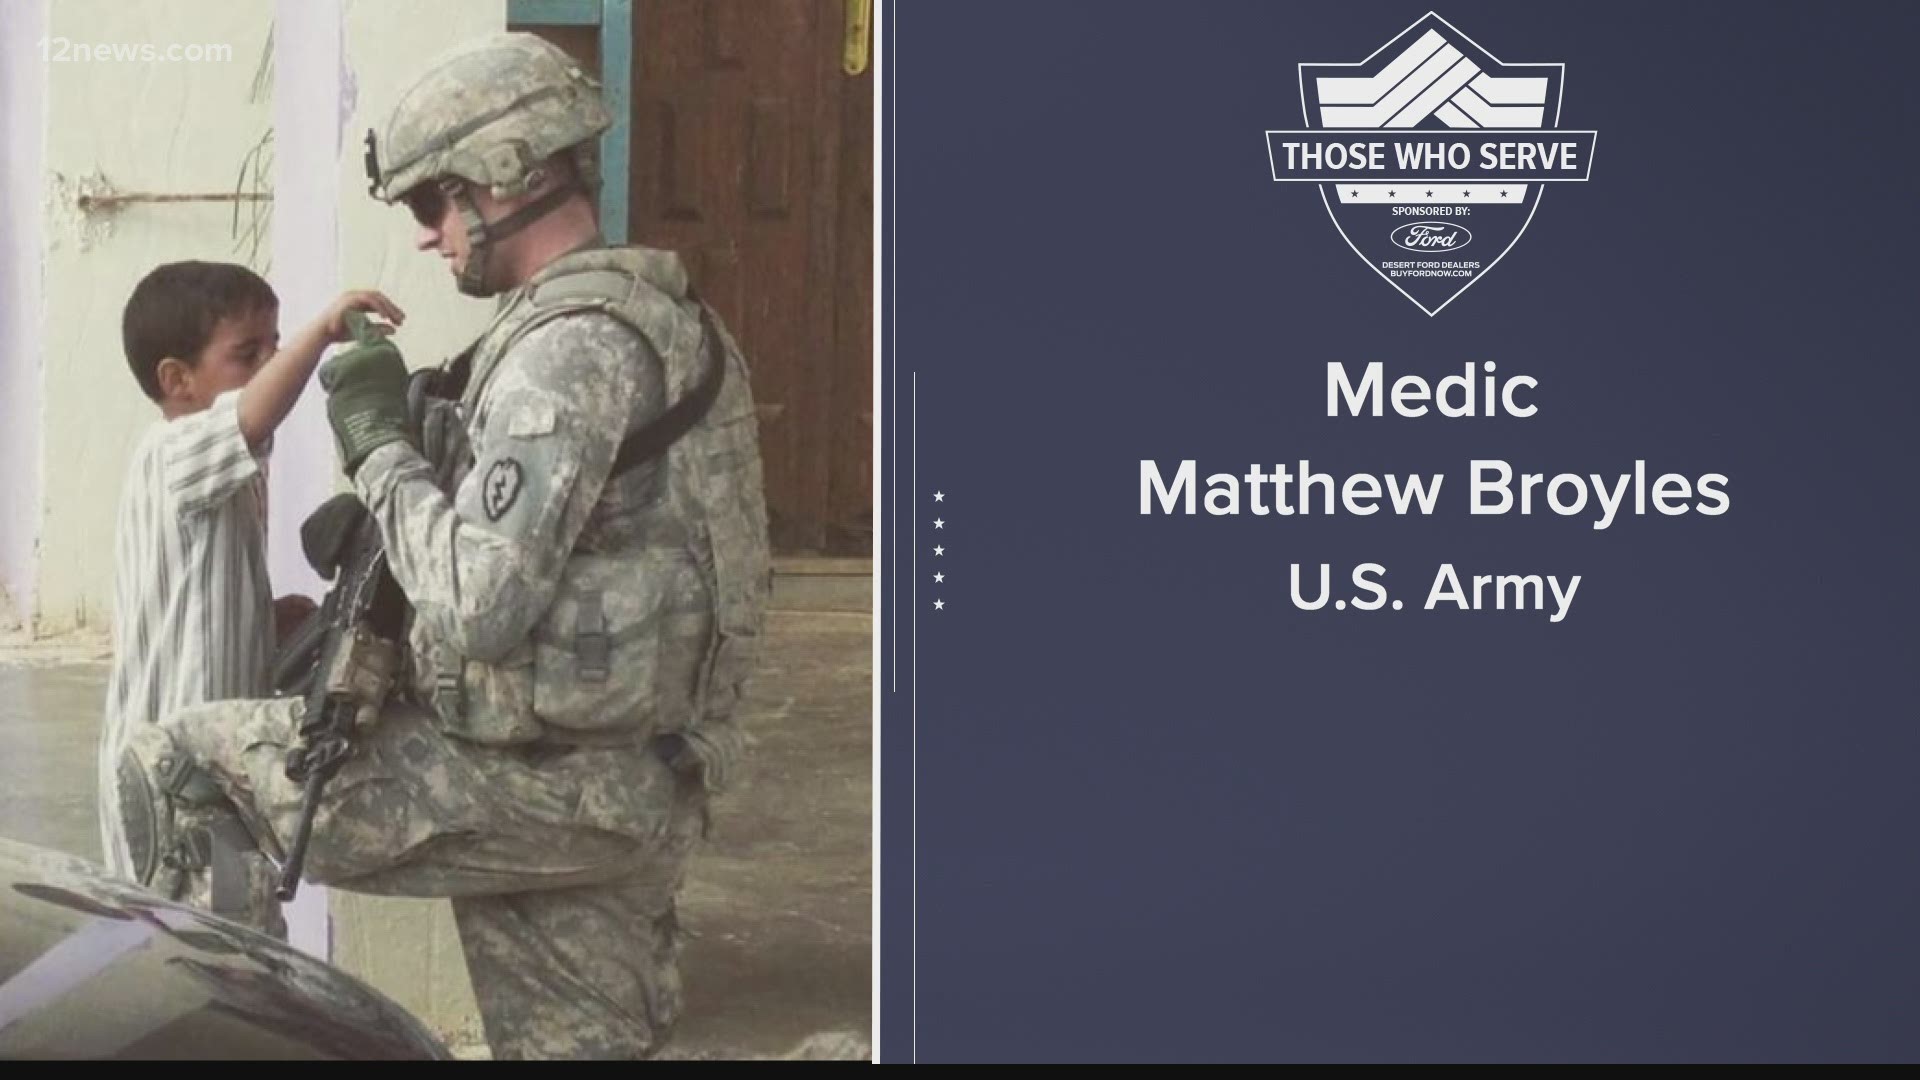 12 News is honoring Those Who Serve. This is Army Medic Matthew Broyles. He's a retired member of the U.S. Army.